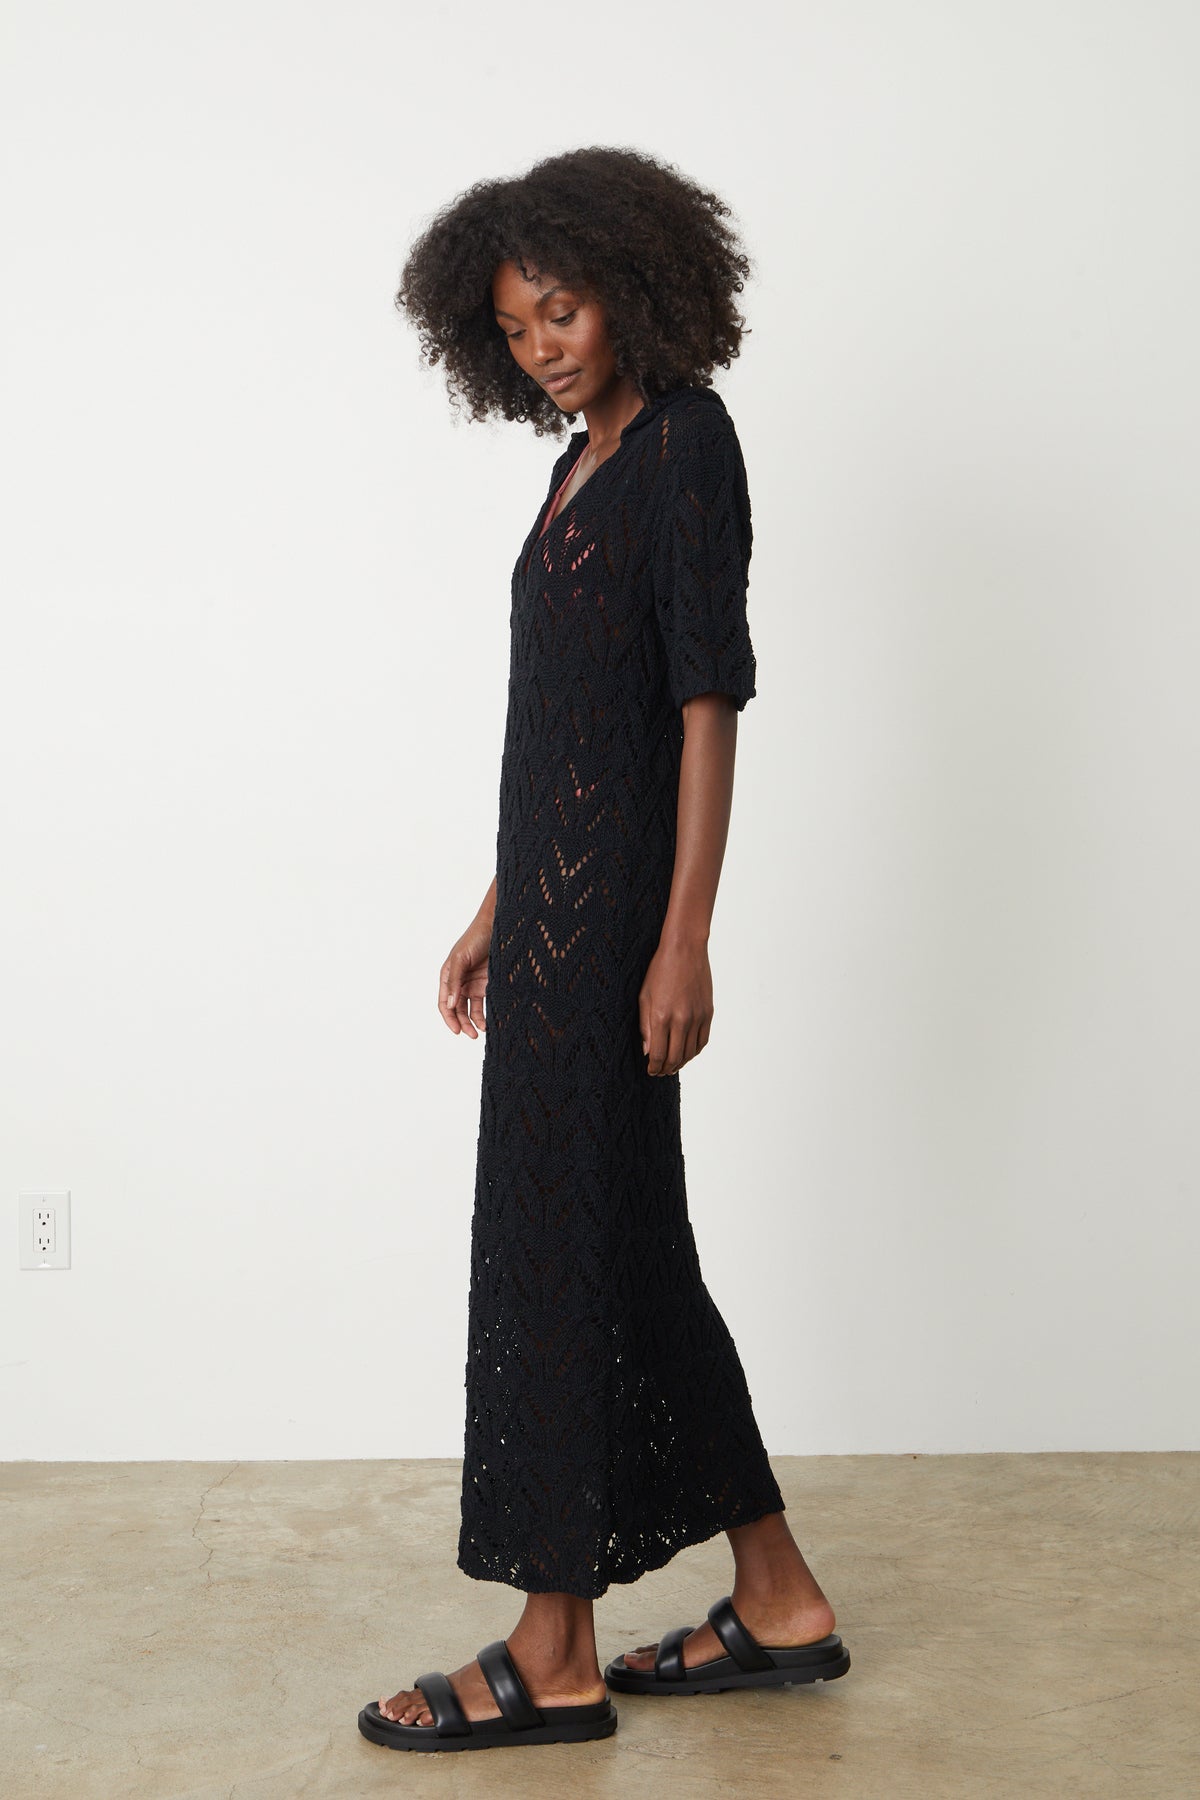 A woman wearing a Velvet by Graham & Spencer Jacqueline Crochet Stitch Maxi Dress and sandals.-35204869554369